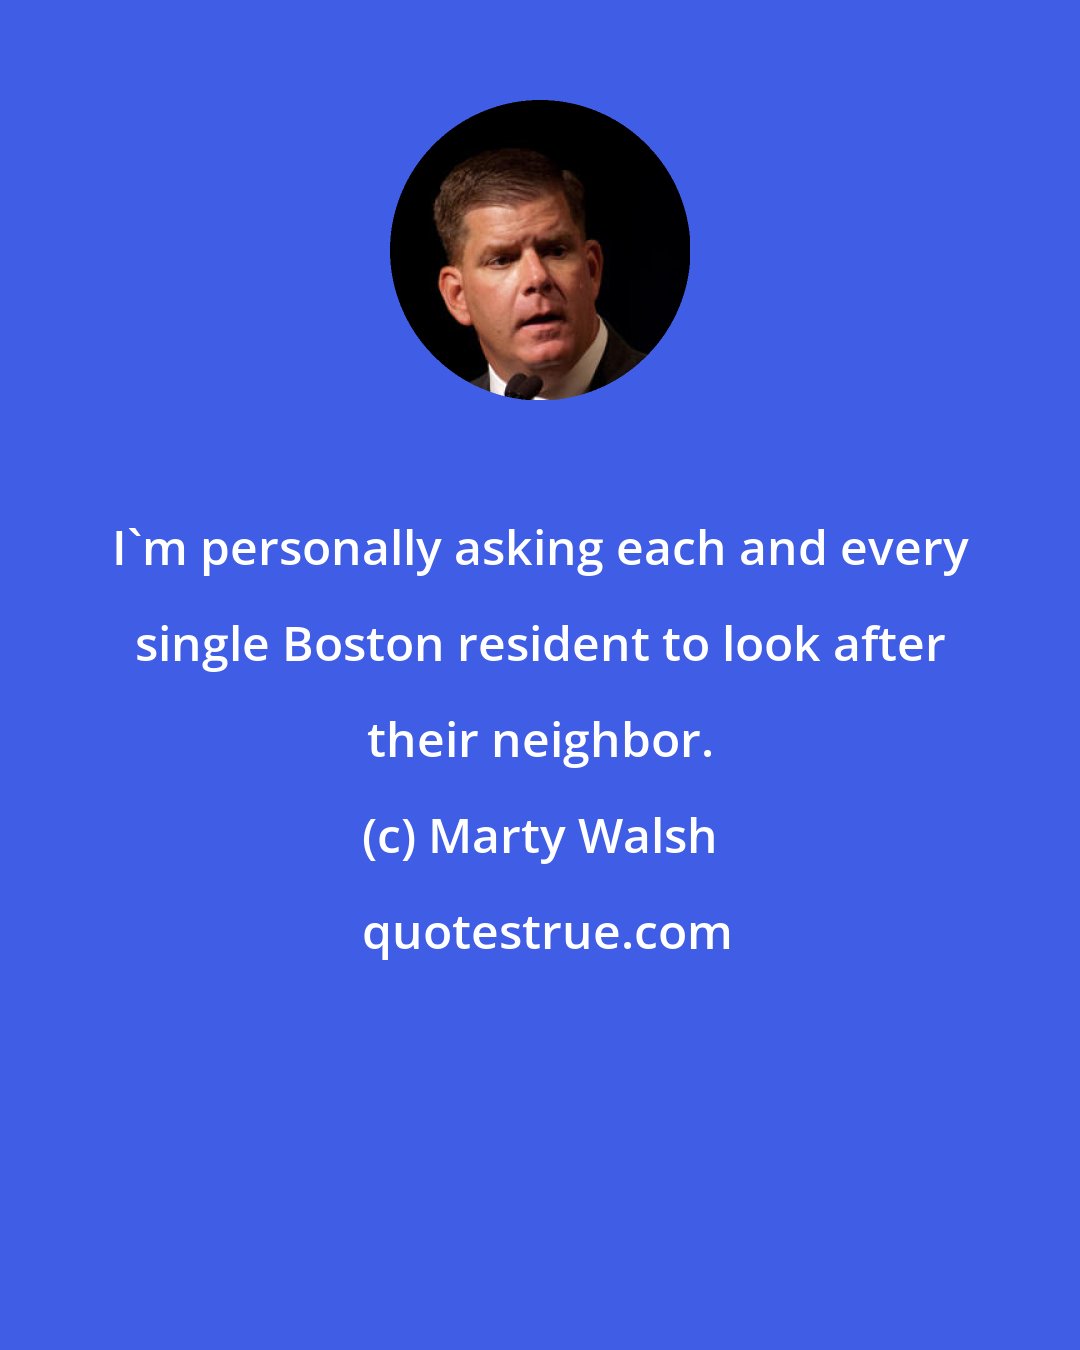 Marty Walsh: I'm personally asking each and every single Boston resident to look after their neighbor.